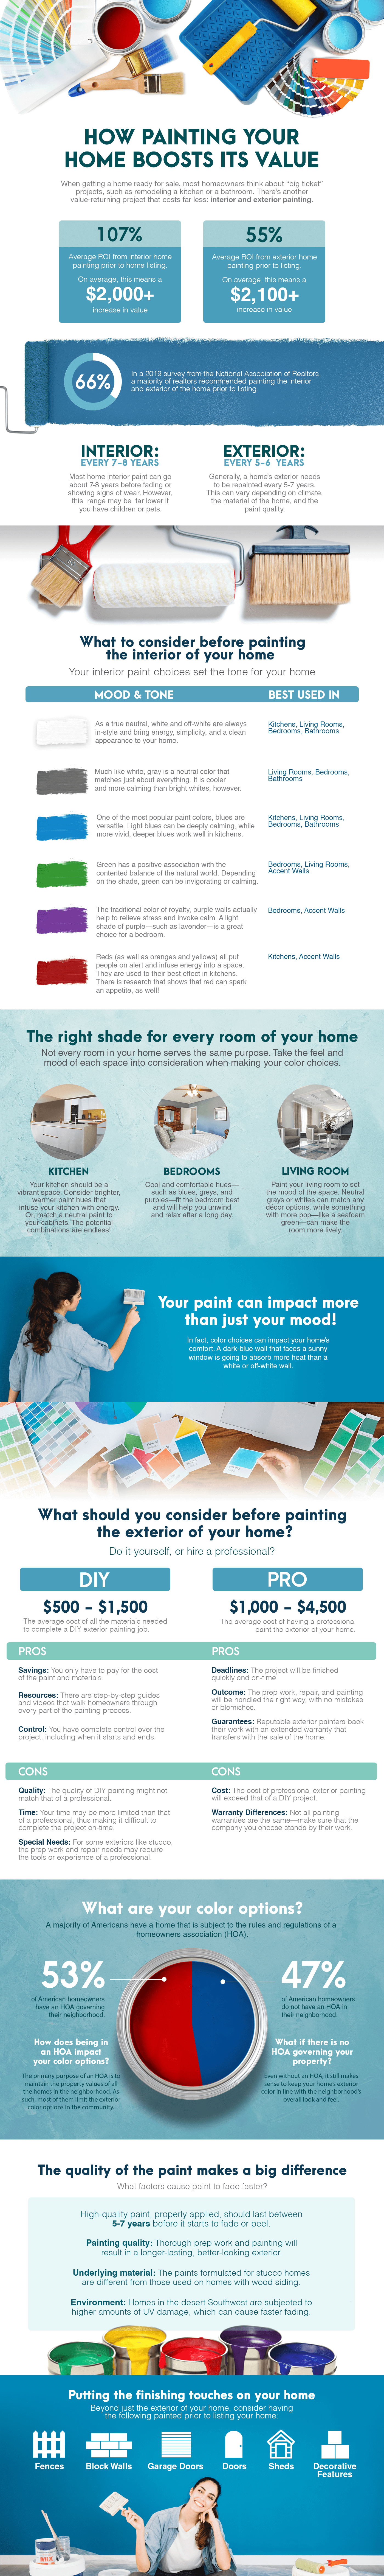 home painting boosts value